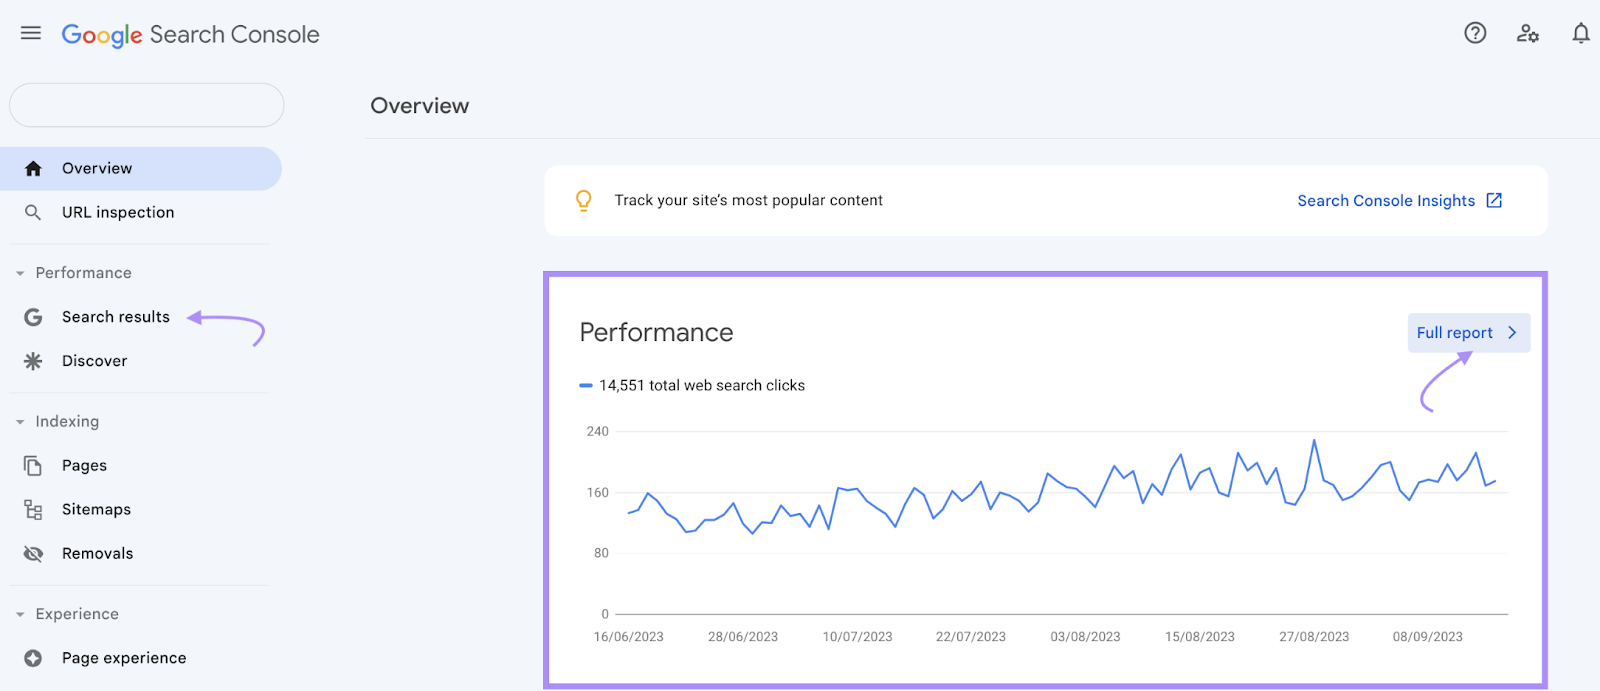 “Performance” graph in Google Search Console